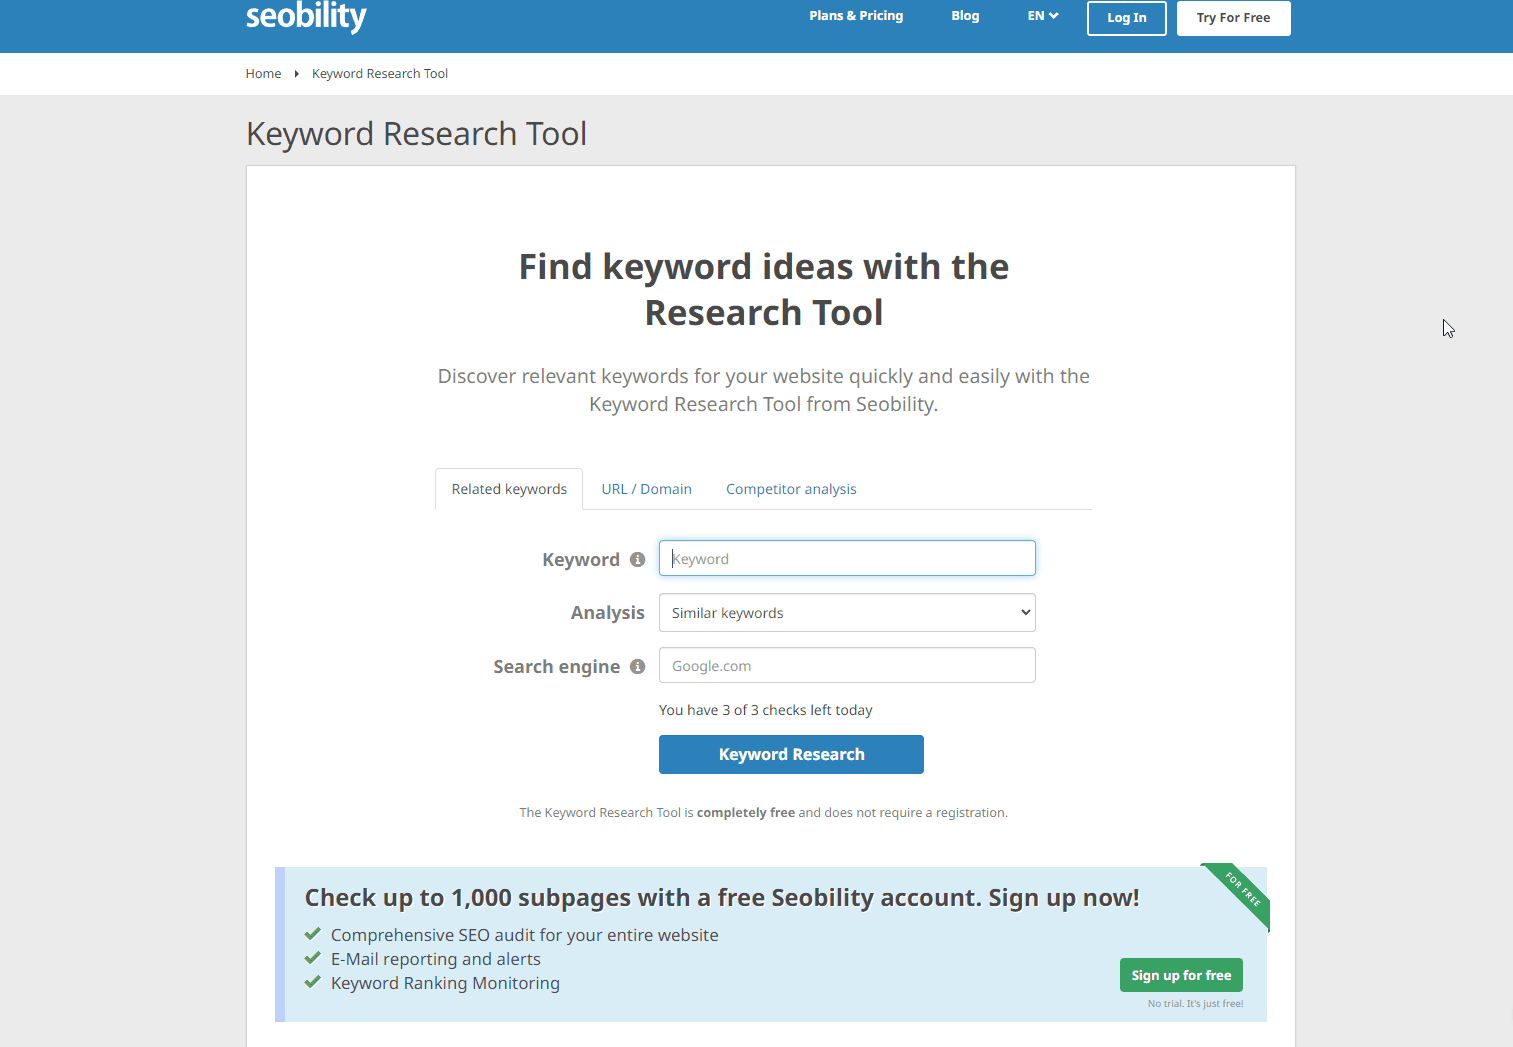 Seobility's Keyword Research Tool main page